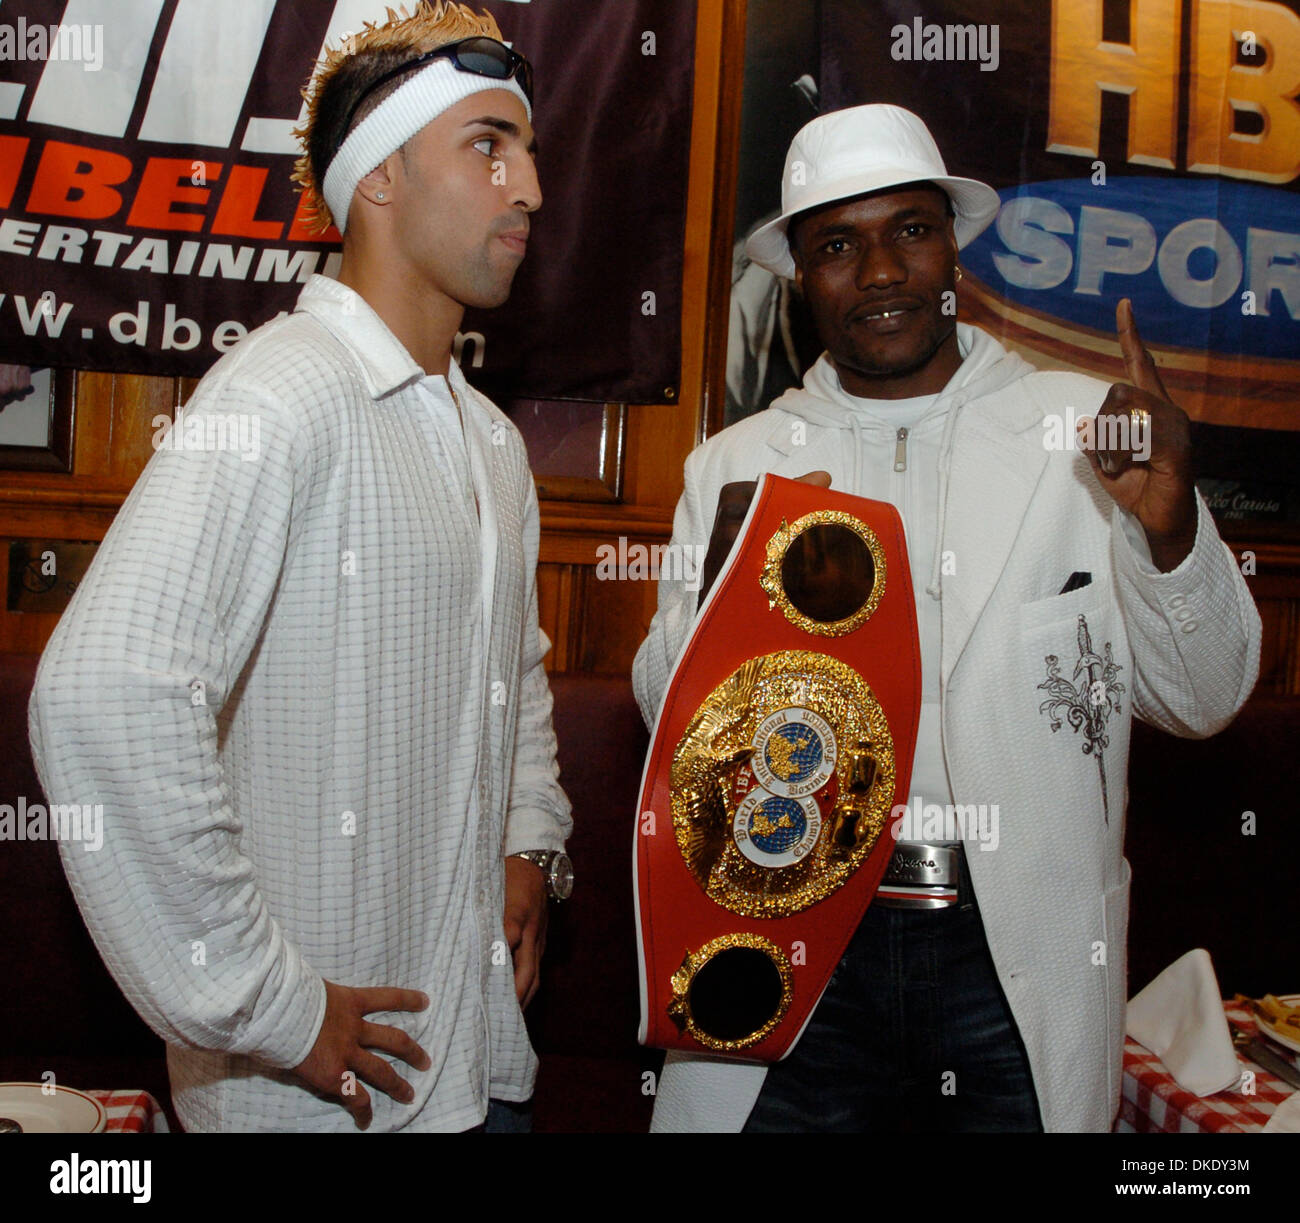 Jun 13, 2007 - Manhattan, NY, USA - Challenger PAULIE MALIGNAGGI (L) and title holder LOVEMORE N'DOU (R), holding the championship belt, pose for a photograph. Gallagher's Steakhouse hosts a press conference promoting the IBF Junior Welterweight Championship bout as Paulie Maliginaggi, of Bensonhurst Brooklyn challenges veteran world titlist Lovemore N'dou this Saturday night, June Stock Photo